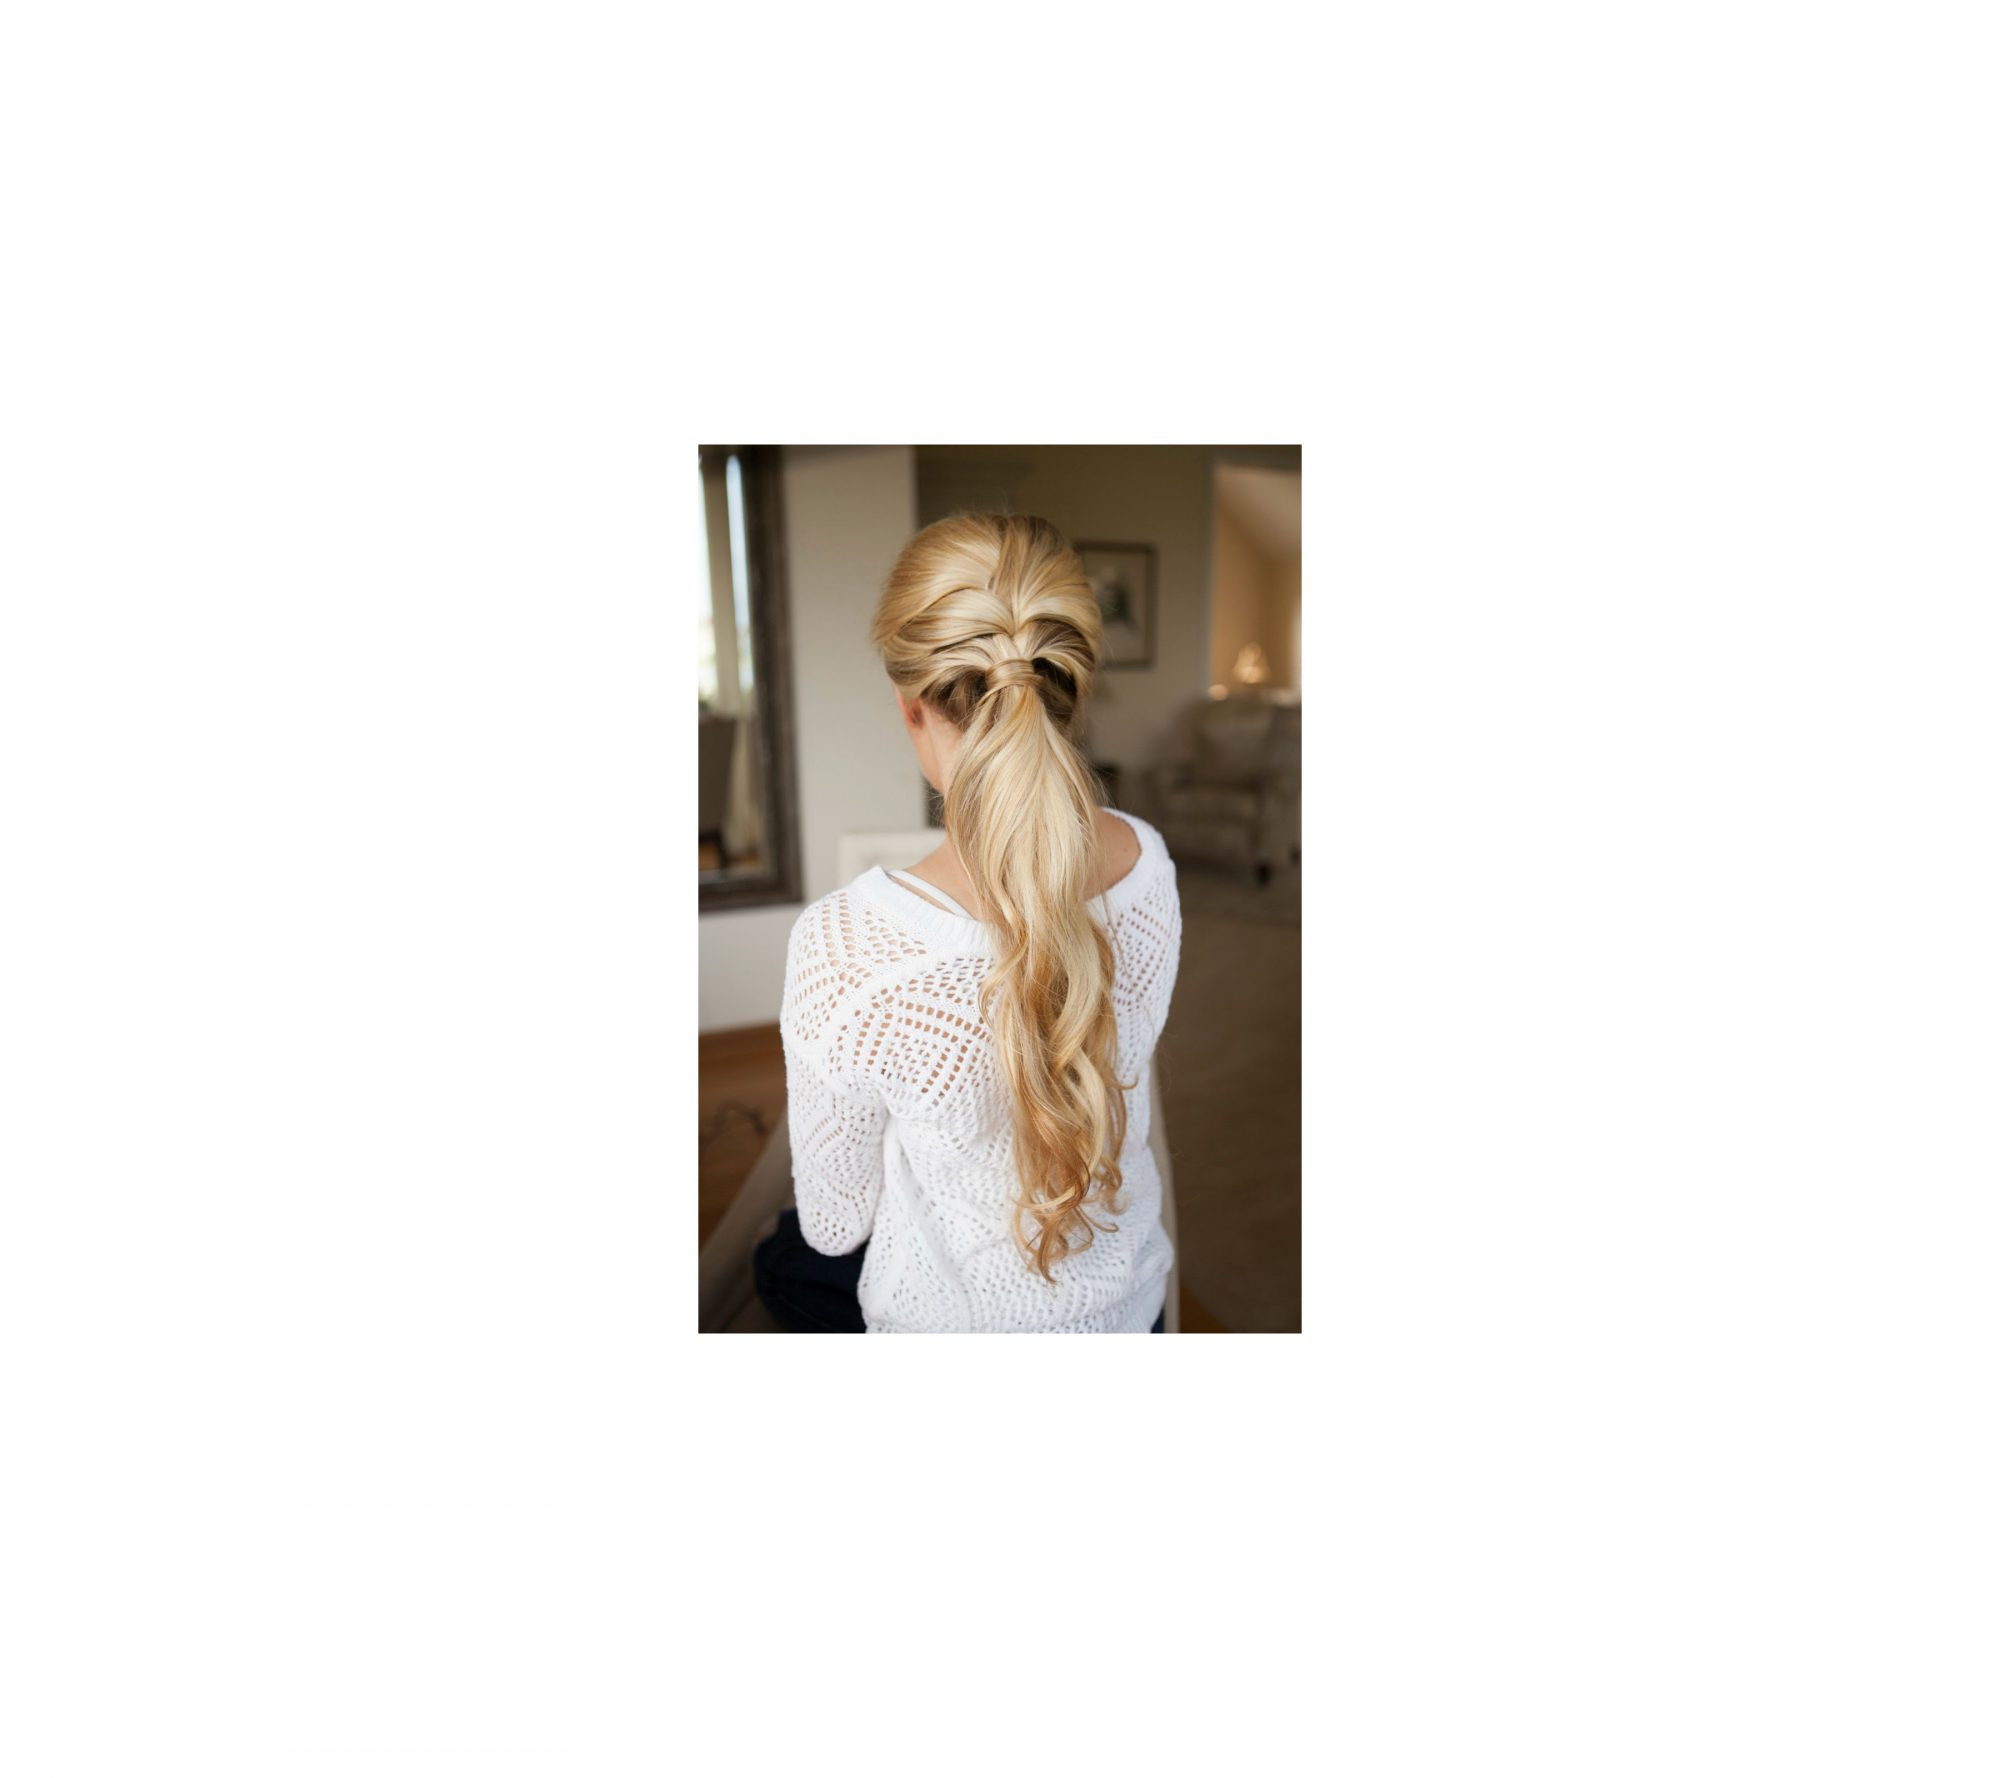 Easy Hairstyles To Do Yourself For School
 The Cute Hairstyles for School Actually Easy to Do